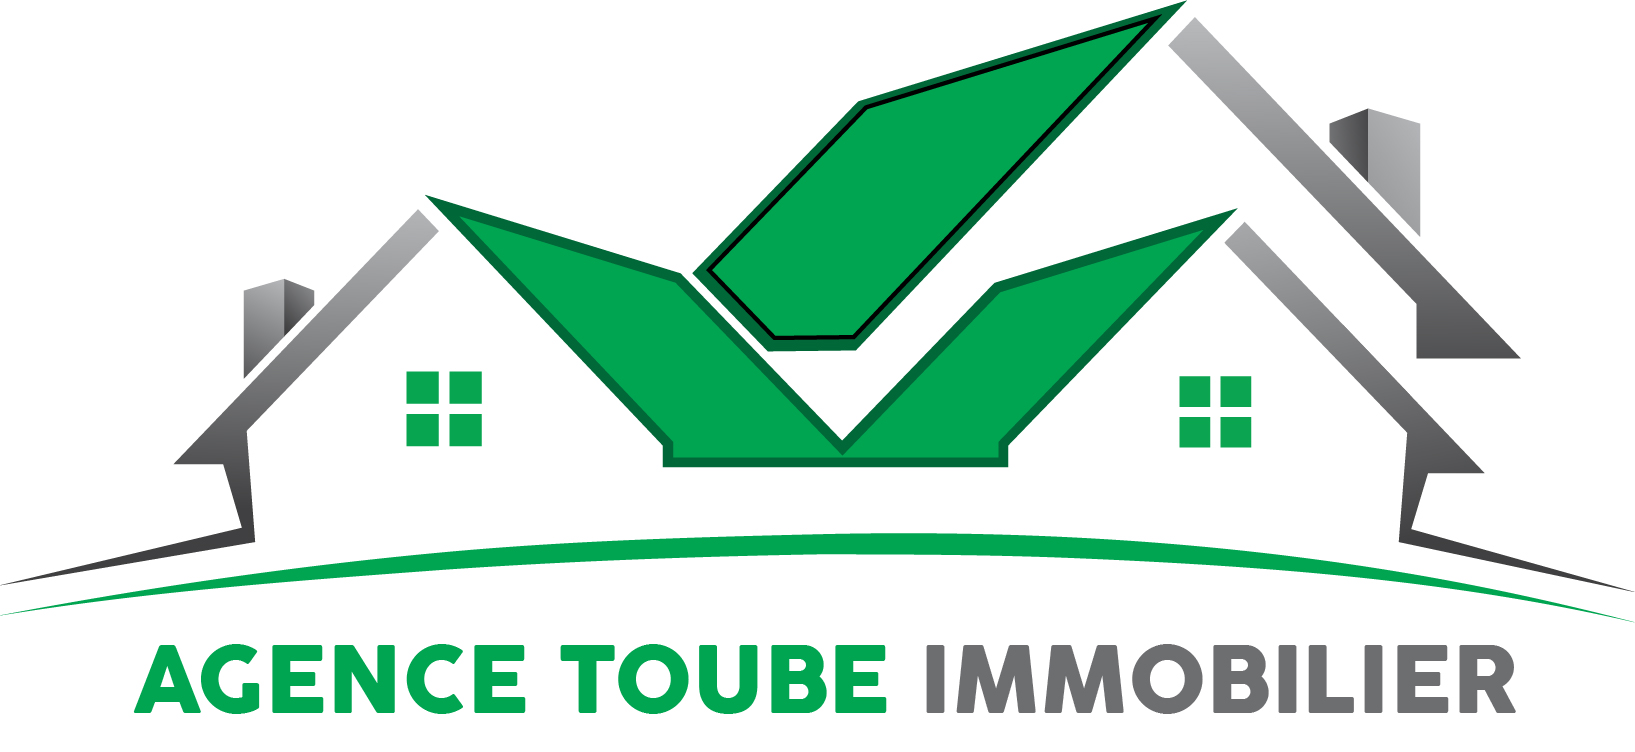 agence toubé immobilier